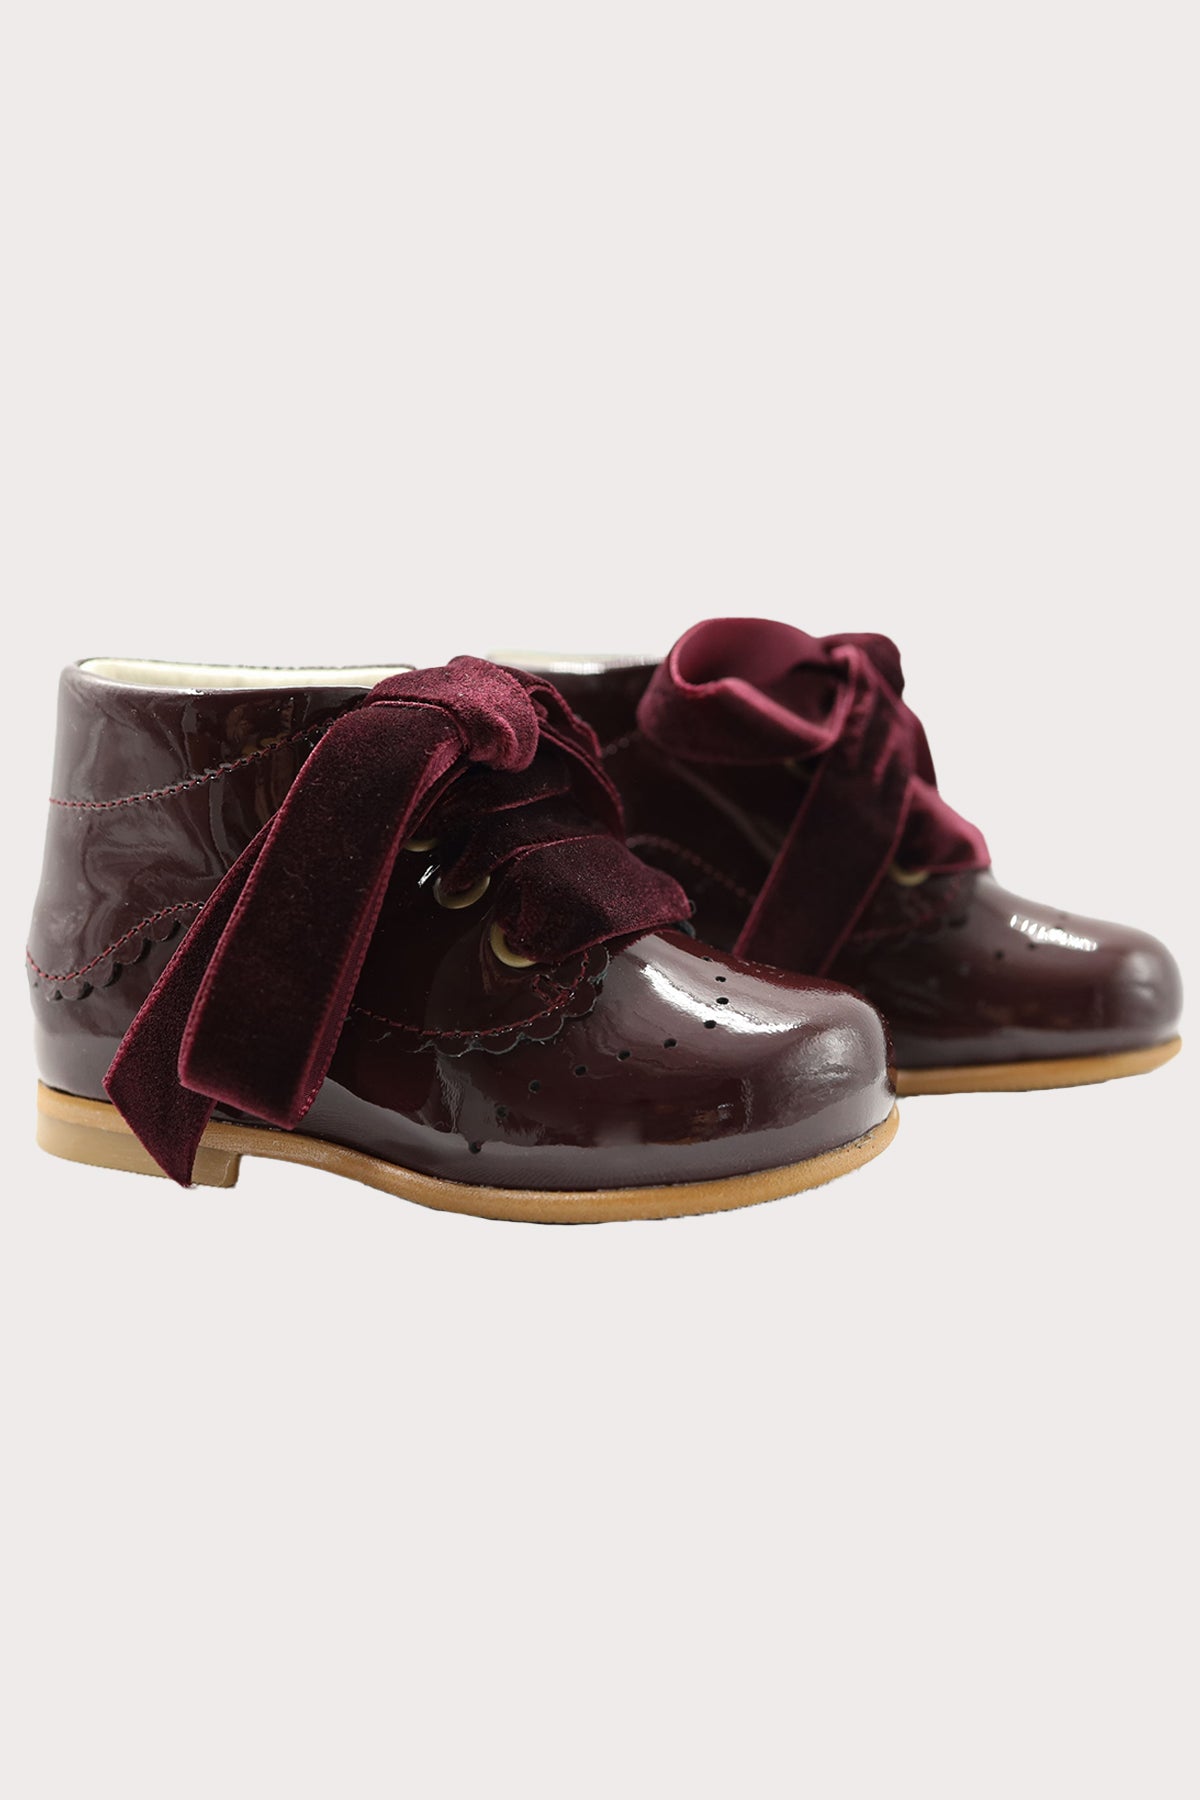 burgundy patent leather girls boots